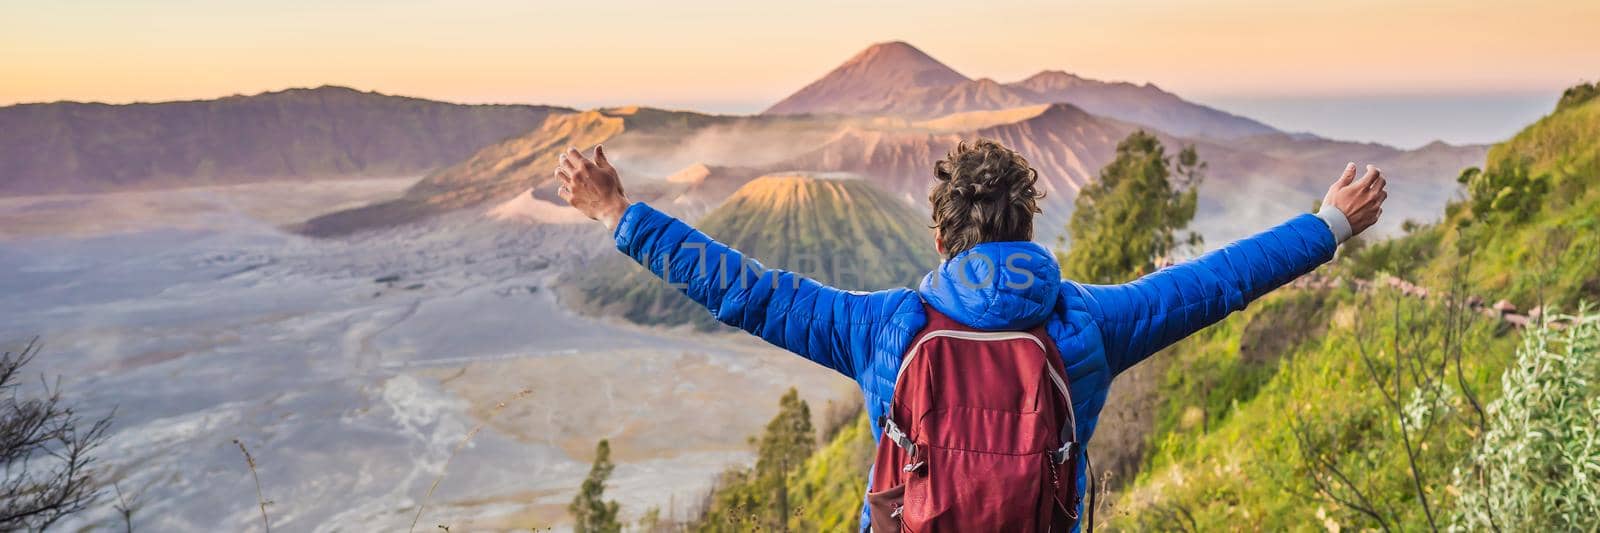 BANNER, LONG FORMAT Young man meets the sunrise at the Bromo Tengger Semeru National Park on the Java Island, Indonesia. He enjoys magnificent view on the Bromo or Gunung Bromo on Indonesian, Semeru and other volcanoes located inside of the Sea of Sand within the Tengger Caldera. One of the most famous volcanic objects in the world. Travel to Indonesia concept by galitskaya